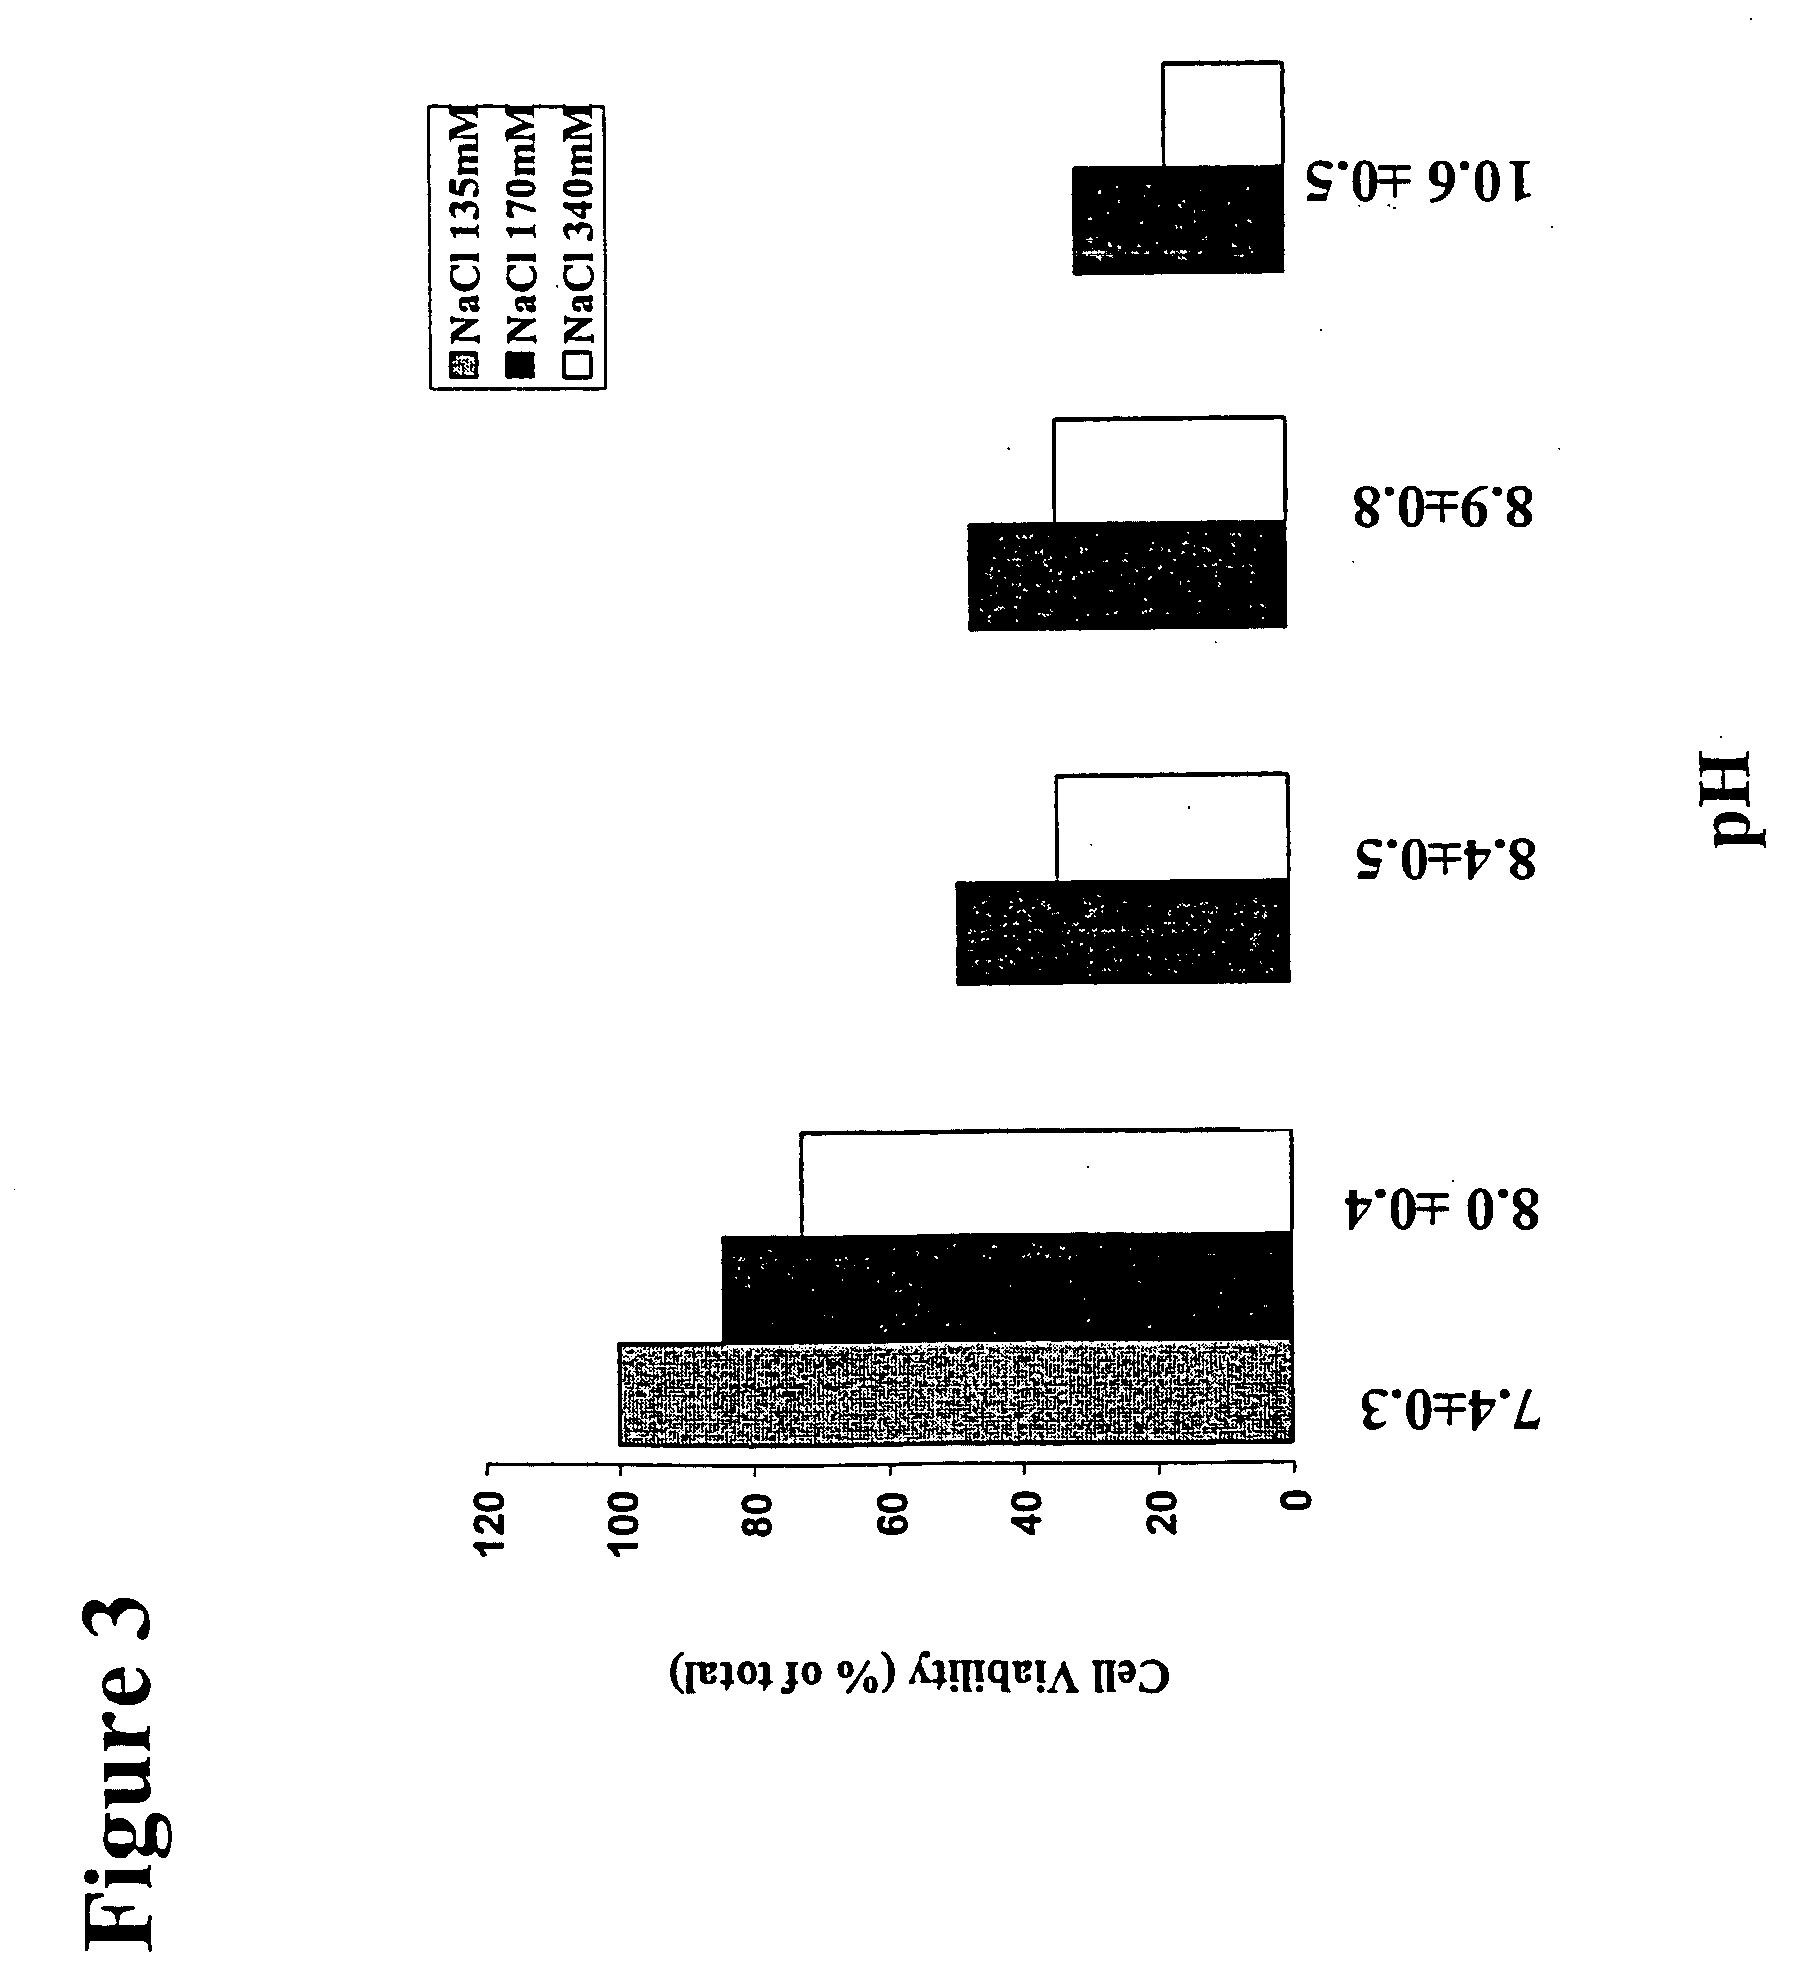 Treatment solution and method for preventing posterior capsular opacification by selectively inducing detachment and/or death of lens epithelial cells